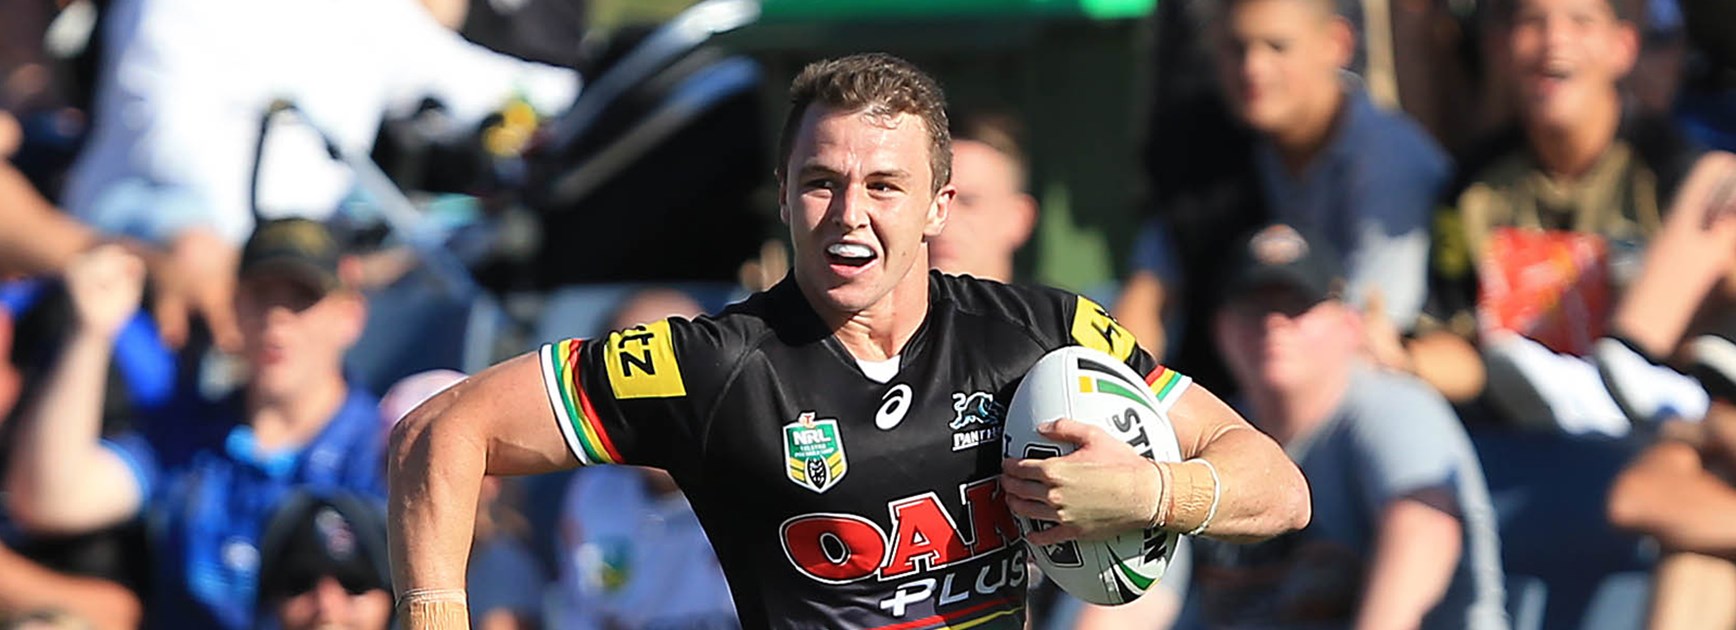 Panthers winger Dylan Edwards scored a try against Wests Tigers in Round 2 of the Telstra Premiership.